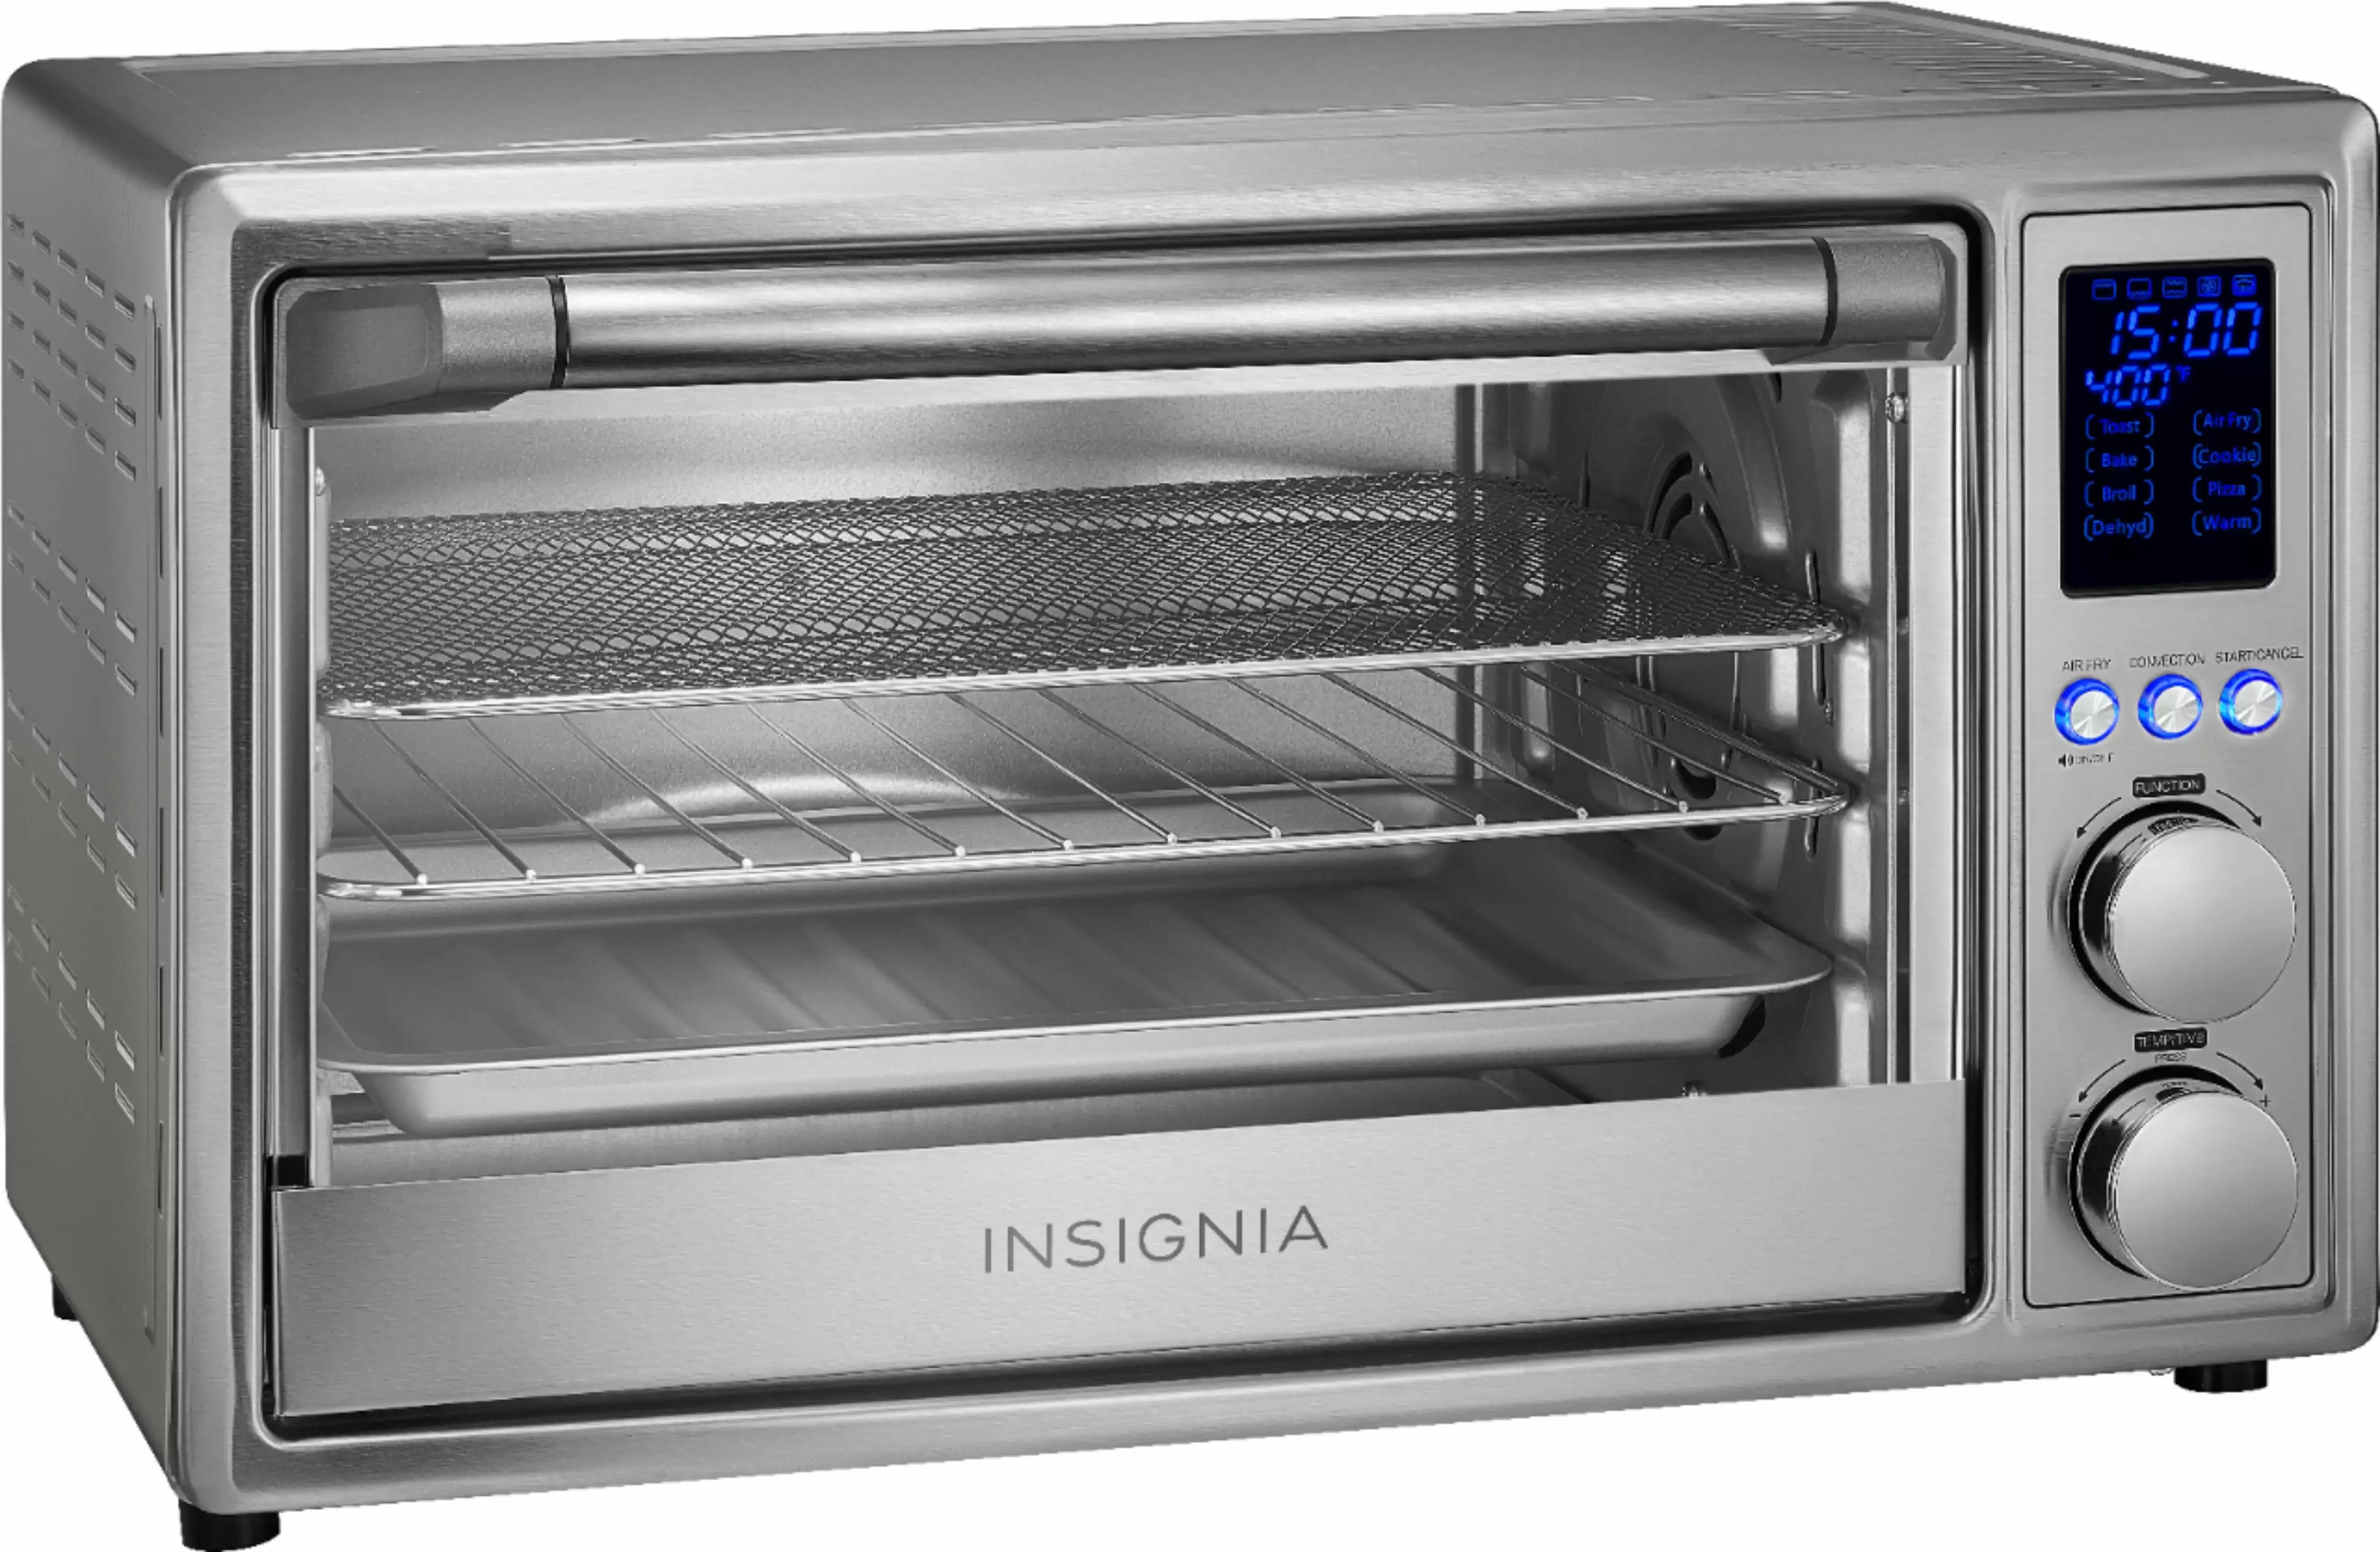 Insignia 6-Slice Toaster Oven Air Fryer for $69.99 Shipped